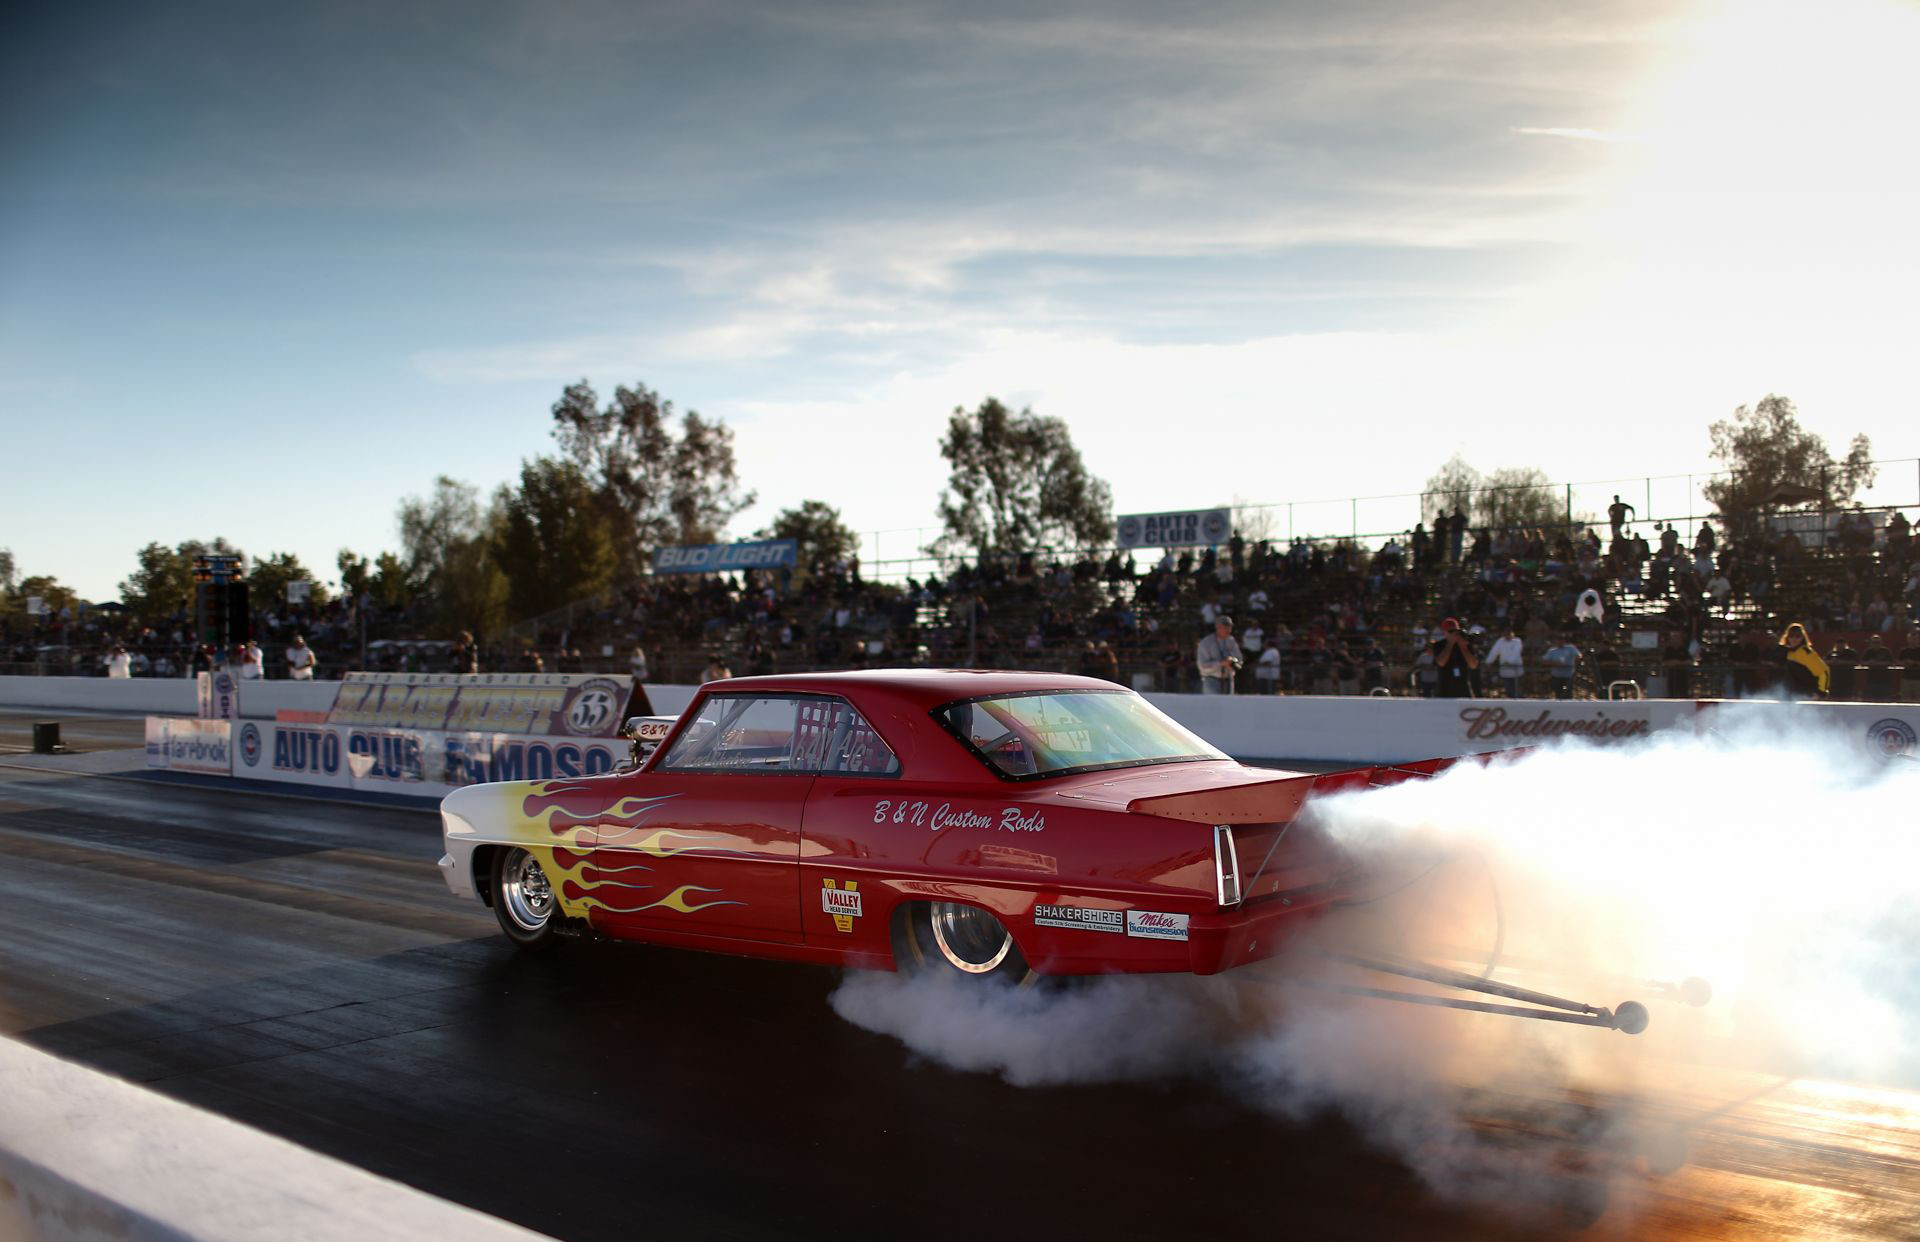 1920x1242 Drag Racing Backgrounds Download 